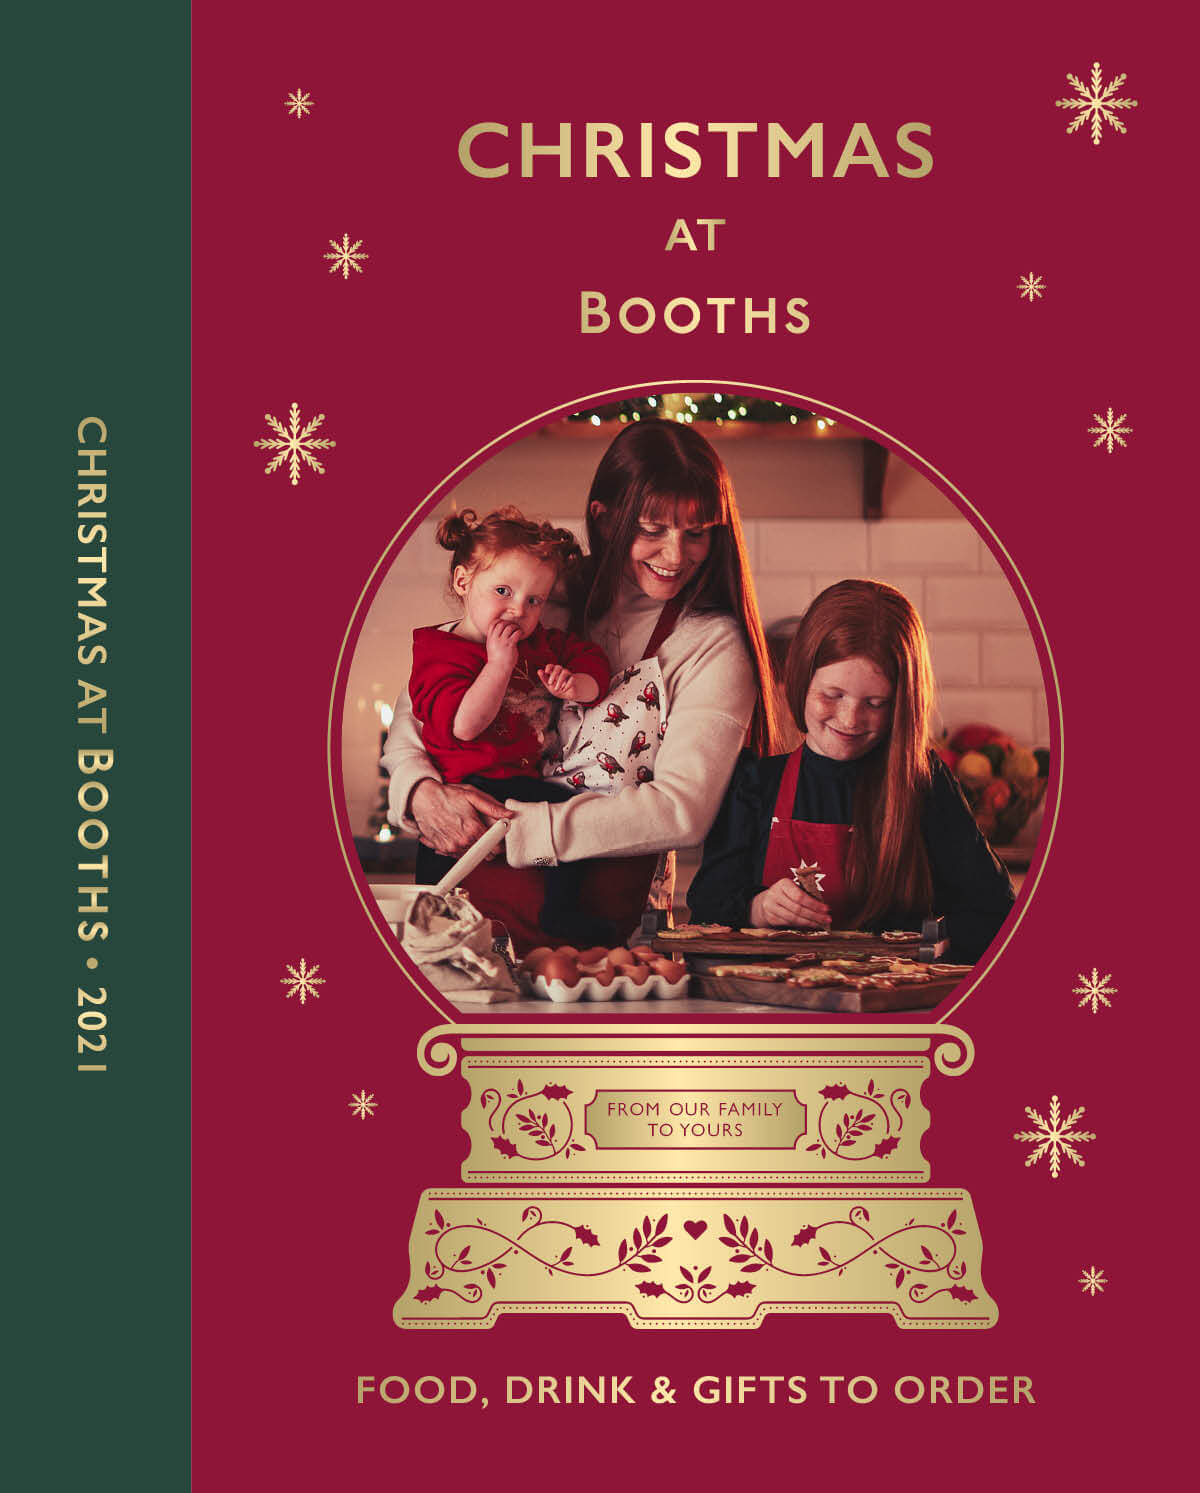 Booths Christmas Book Cover 2015